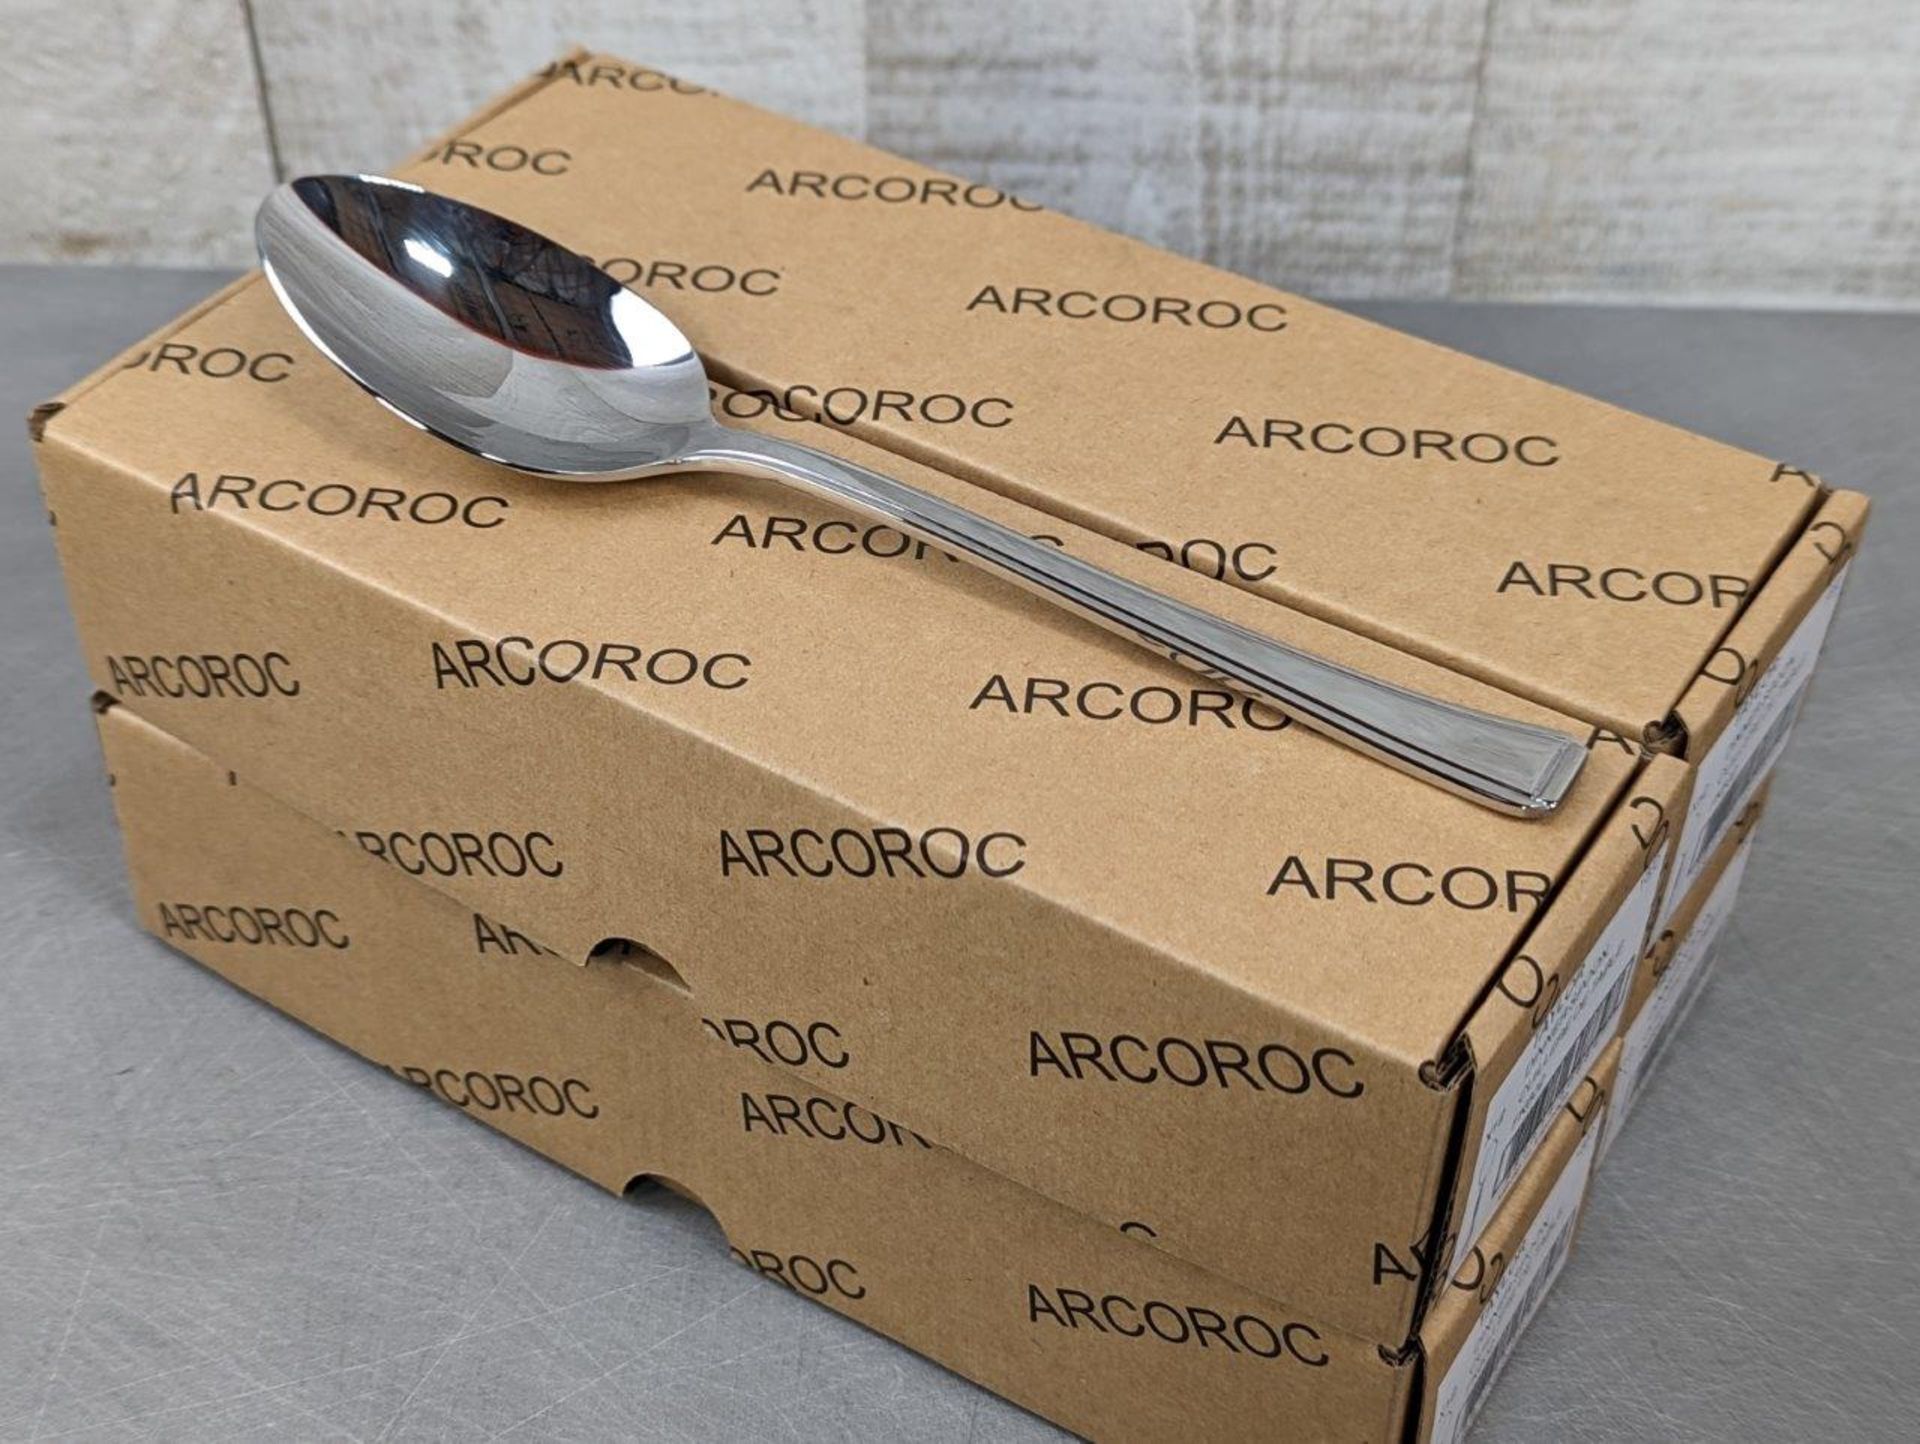 TAYLOR DINNER SPOONS, ARCOROC FK602 - LOT OF 48